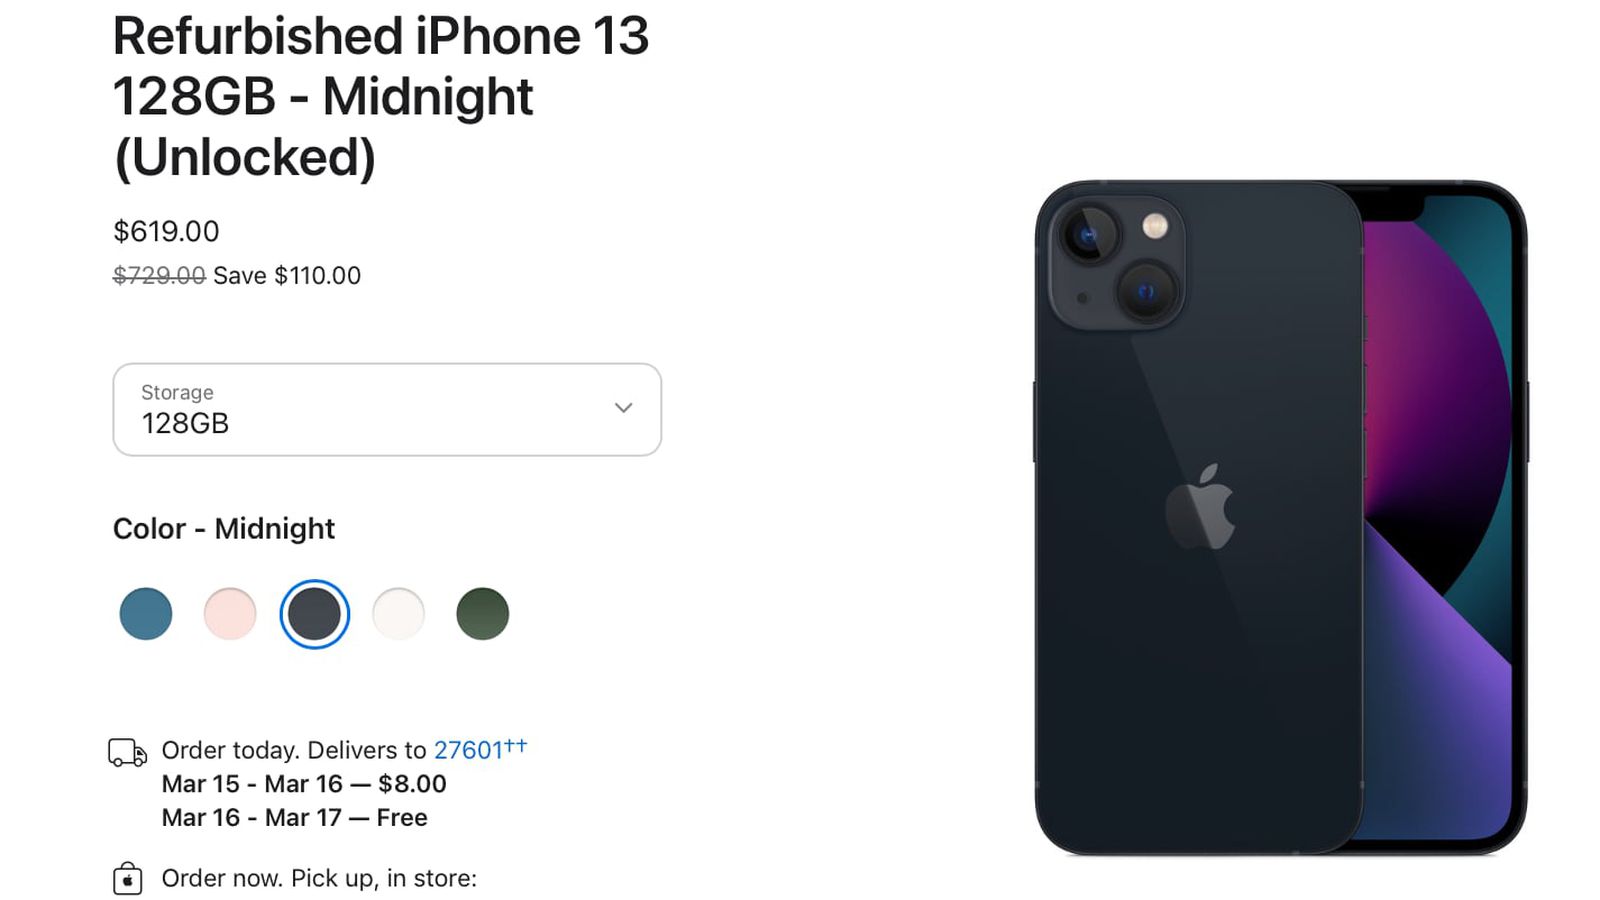 Refurbished iPhone 13 Models Now Available From Apple's U.S. Store